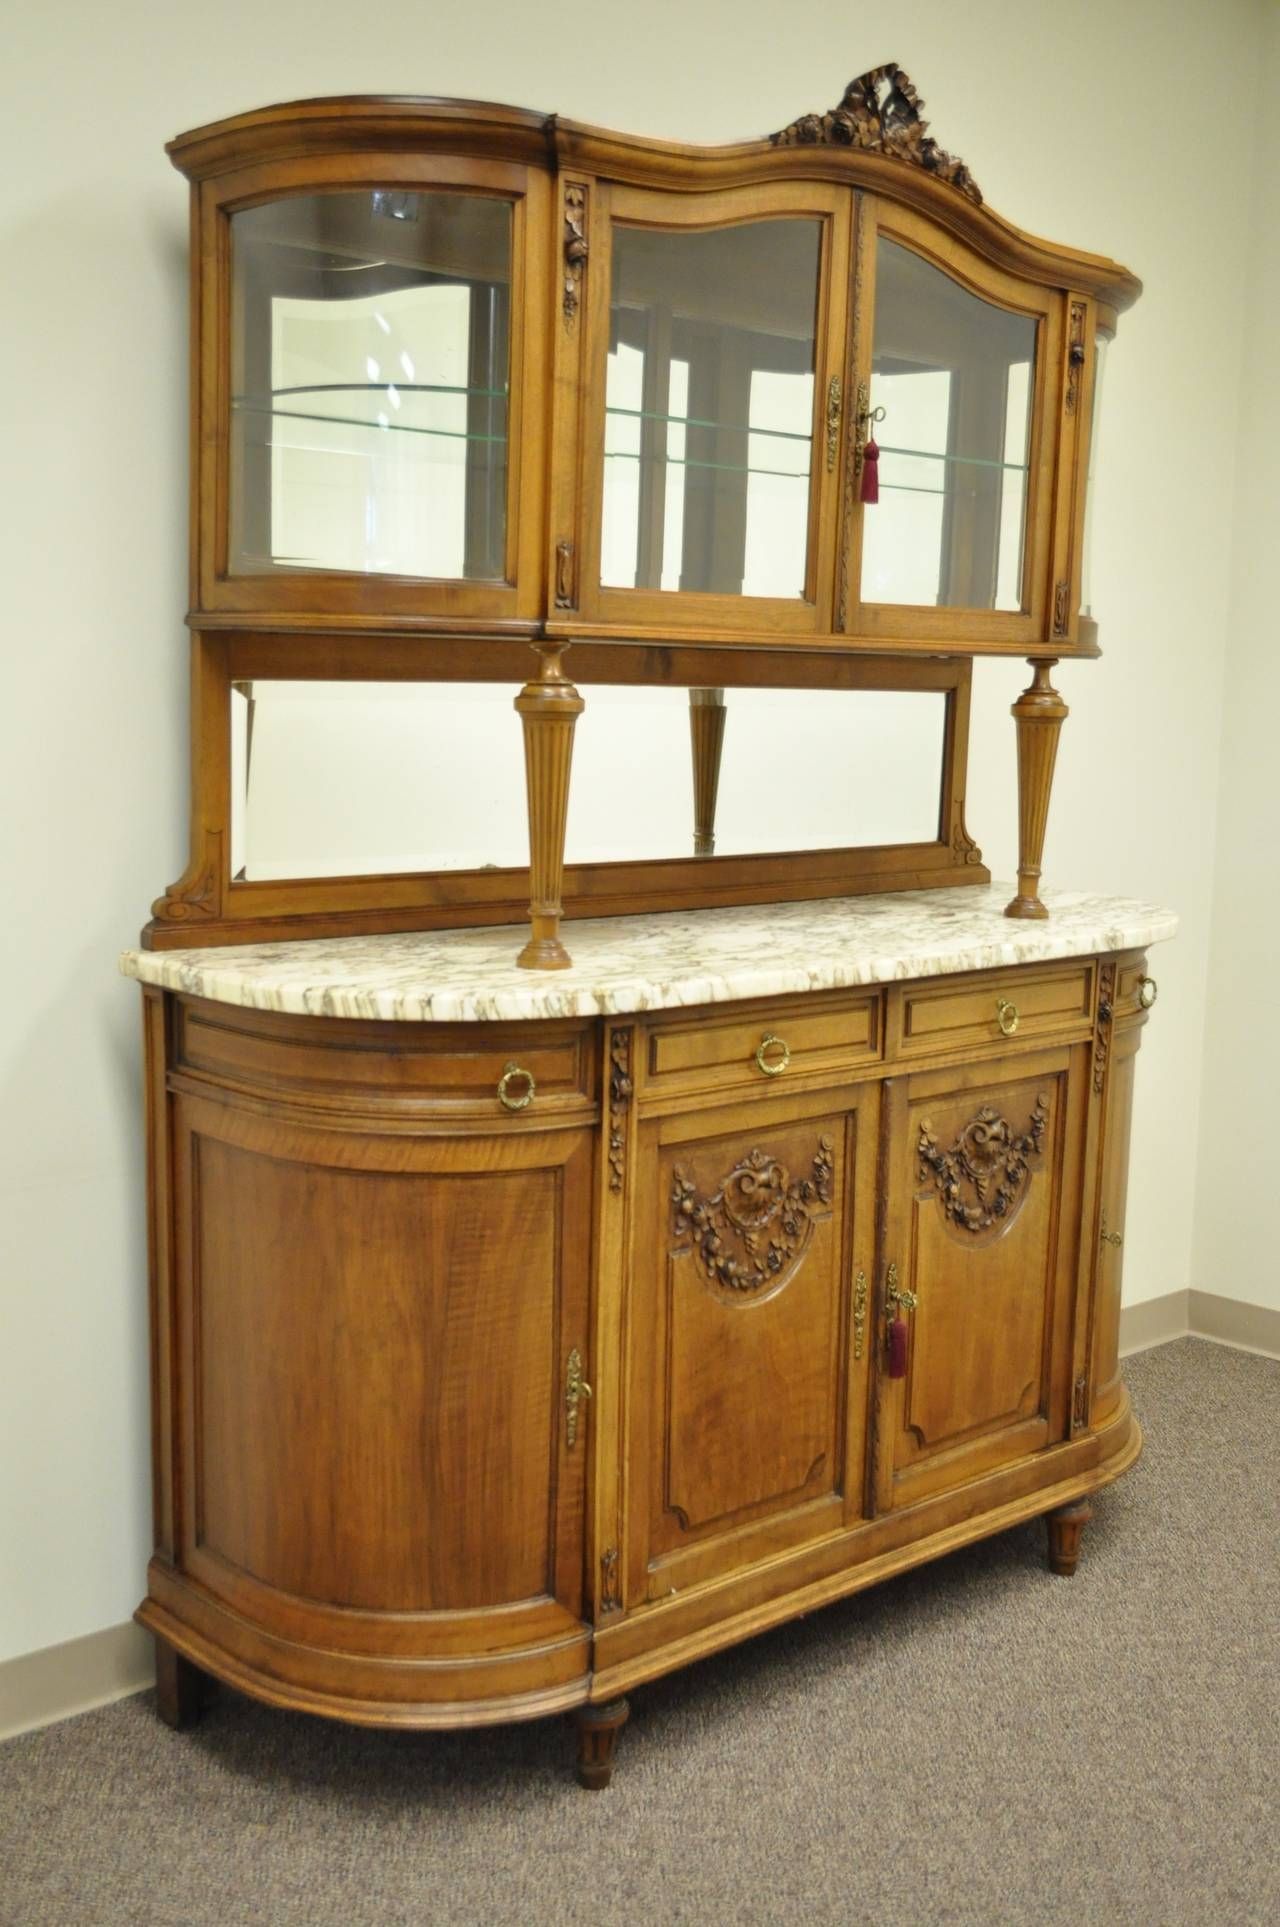 French Louis Xvi Style Marble Top Sideboard Or Curio Cabinet With Regard To Marble Top Sideboards (View 9 of 15)